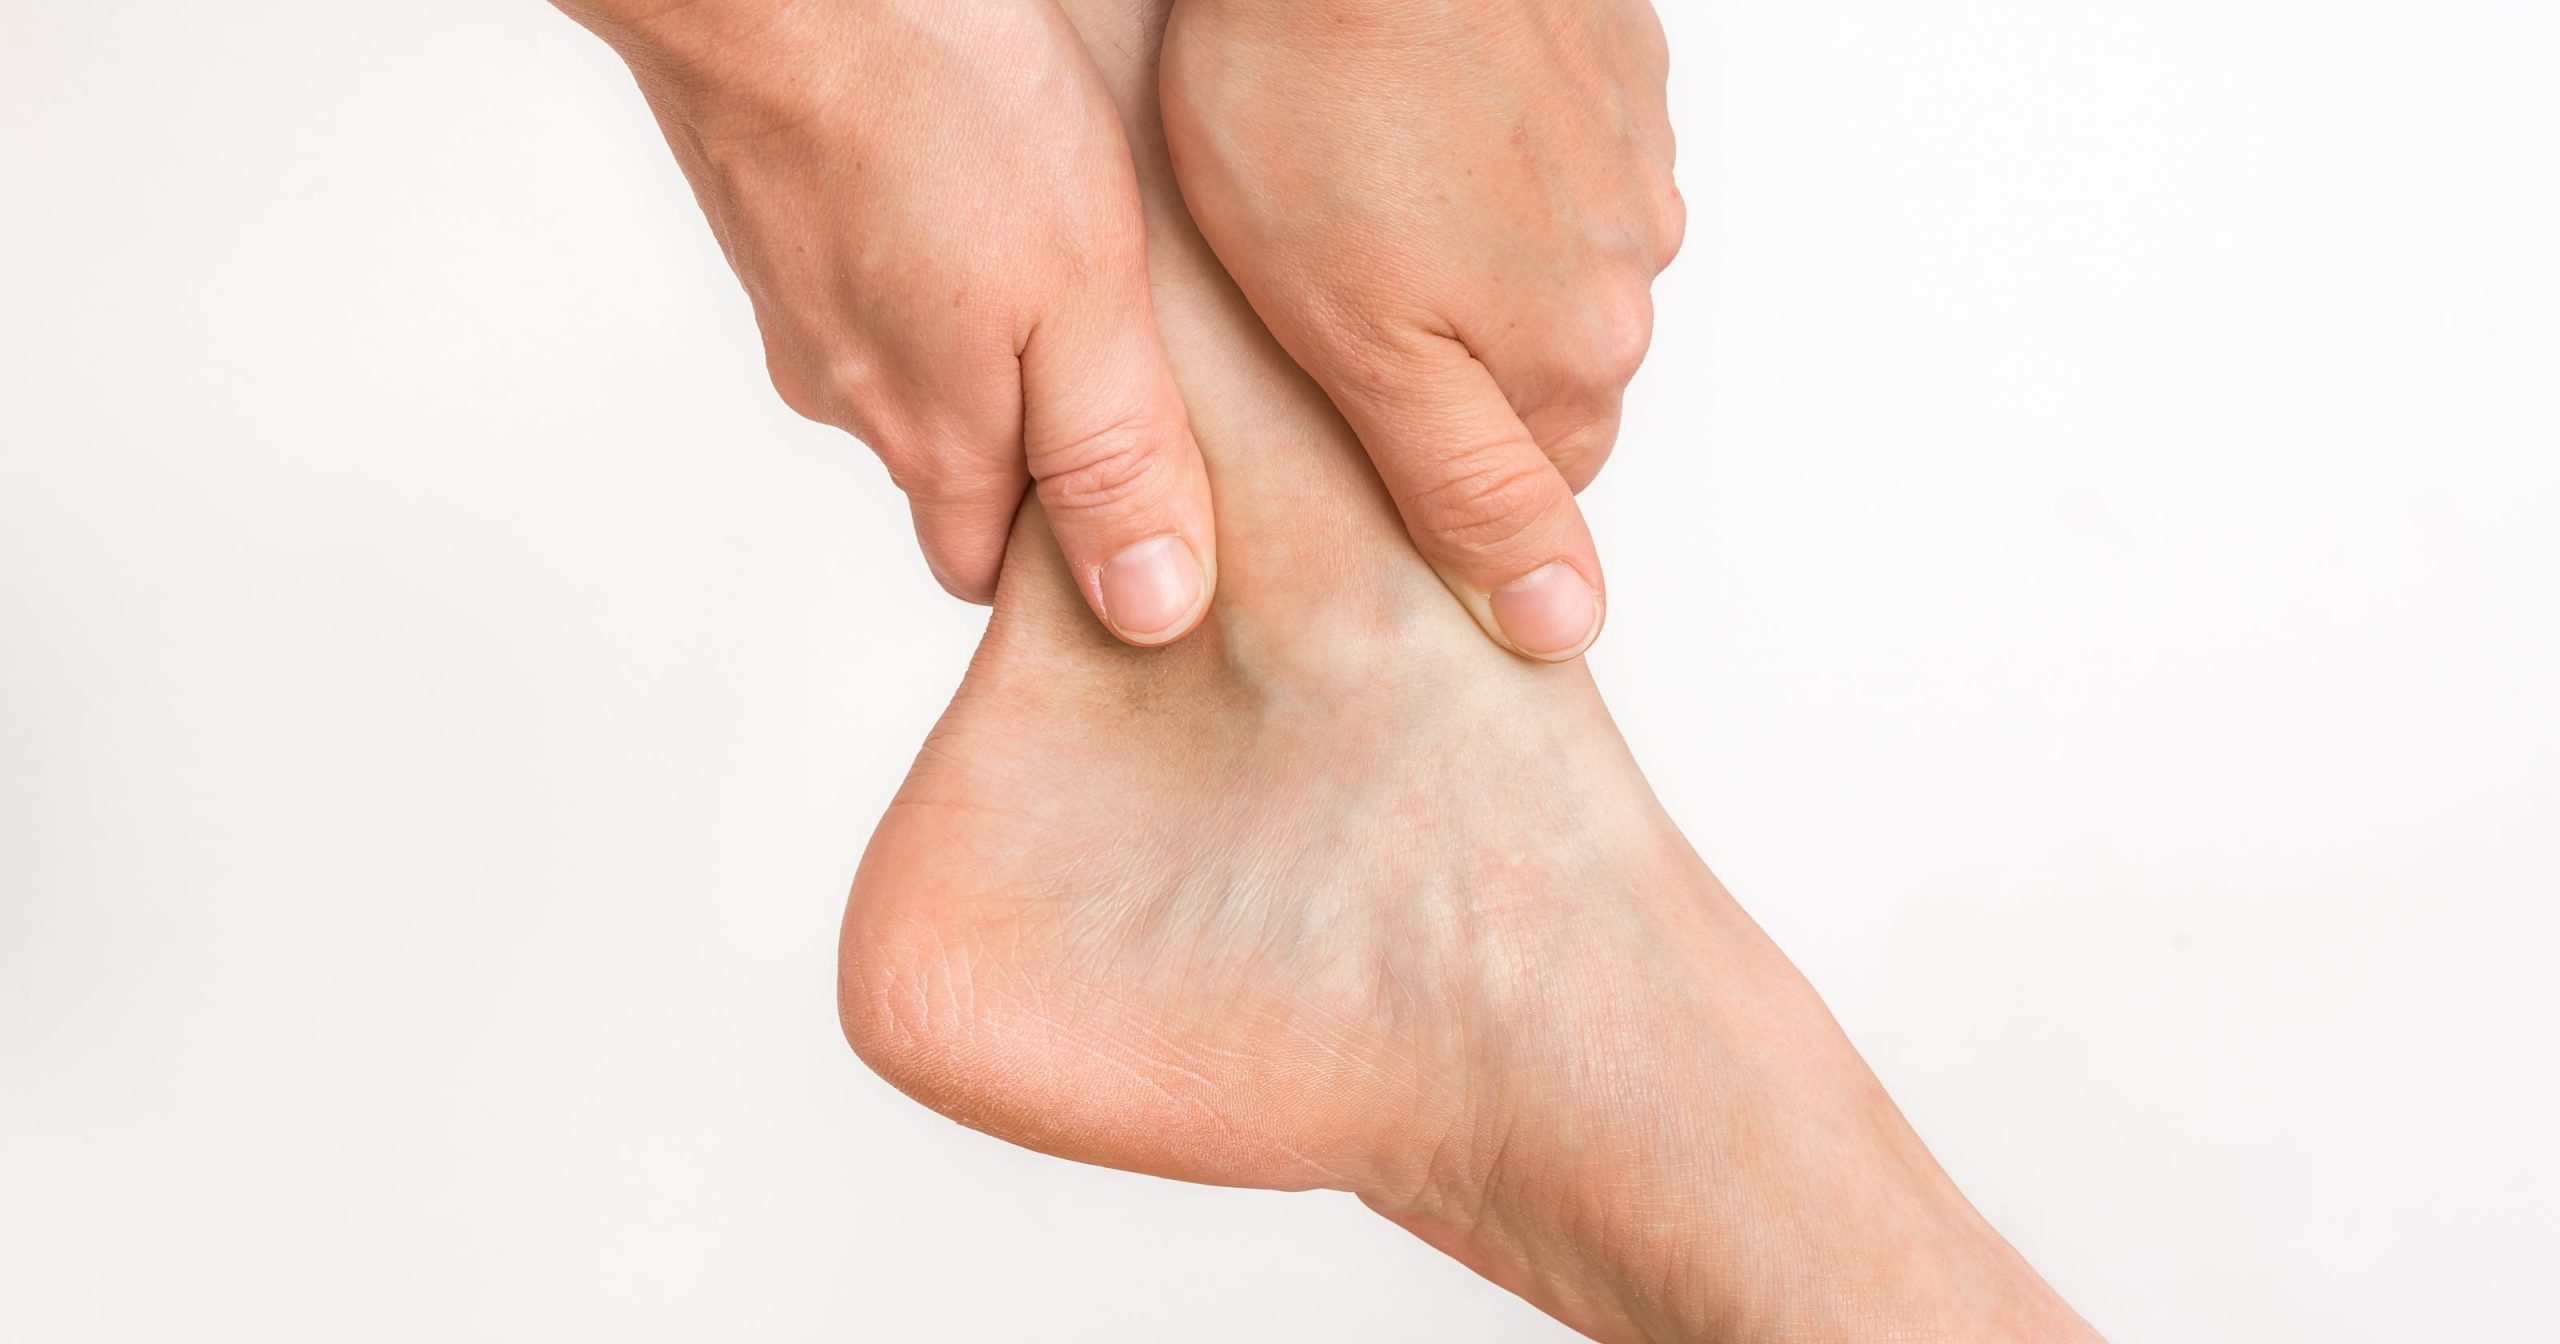 Ankle injuries can lead to future arthritis pain